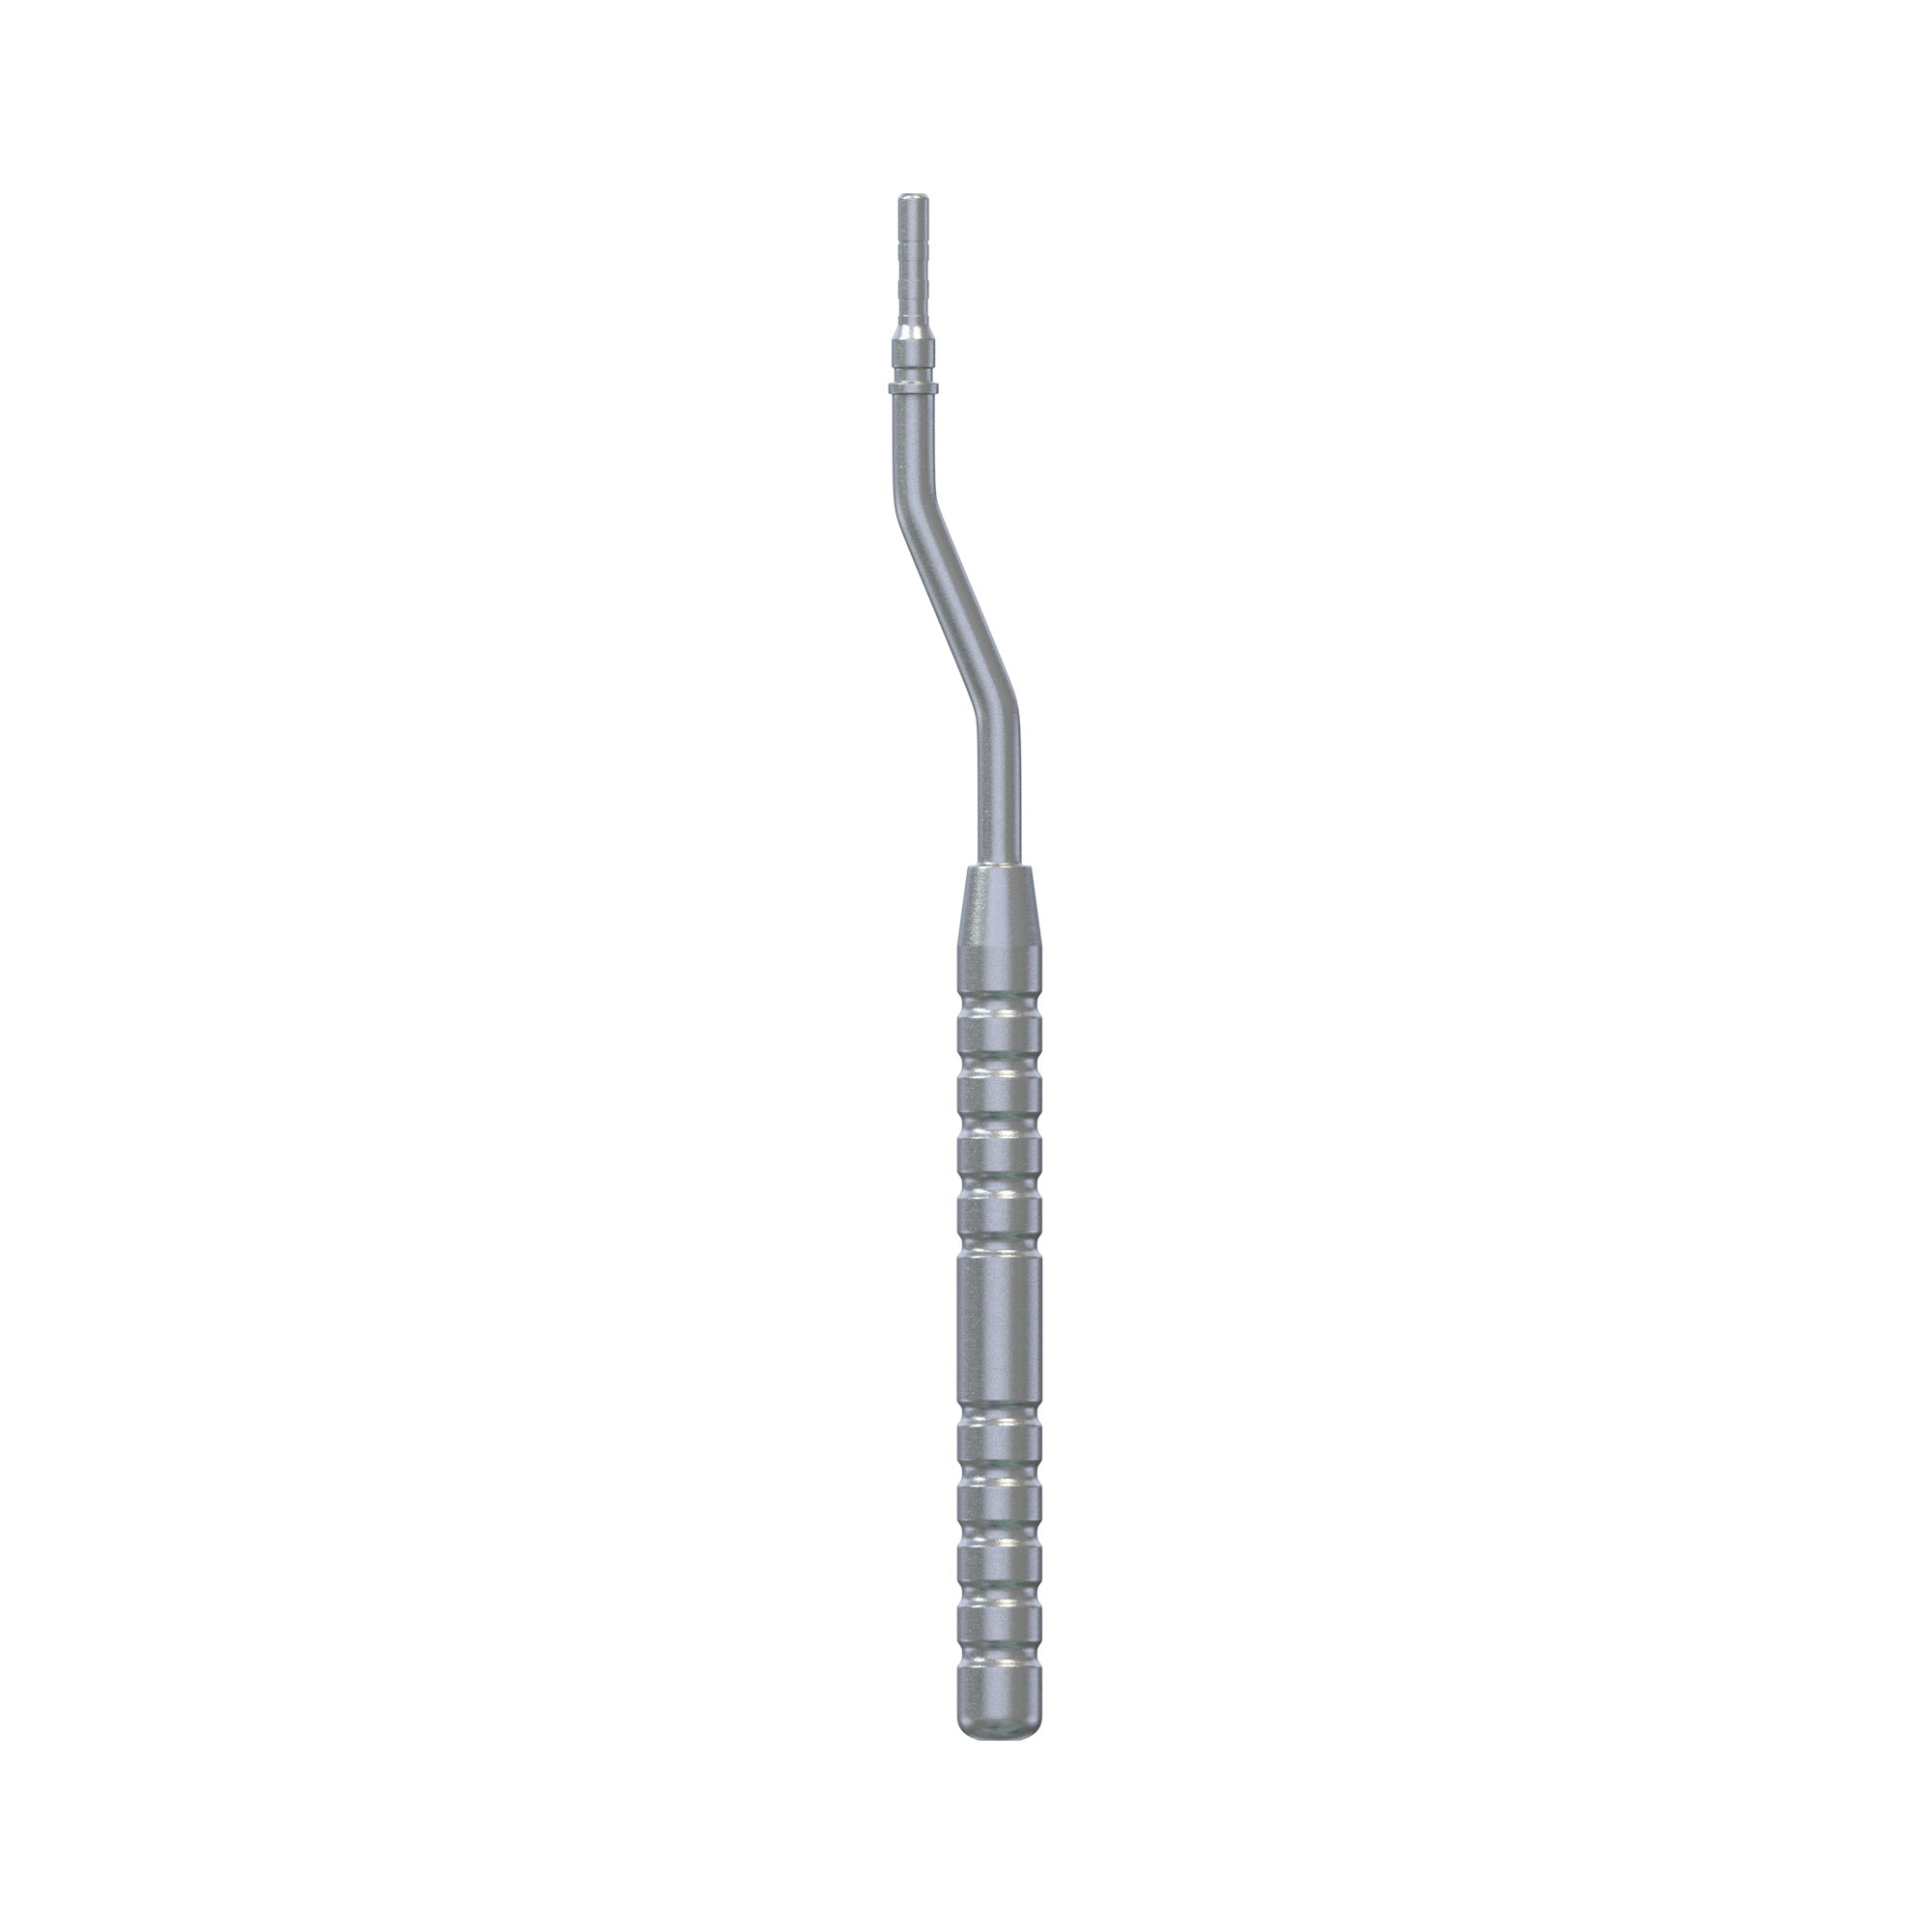 DSI Osteotome For Bone Condensing and Sinus Lifting (SD-CONVEX)